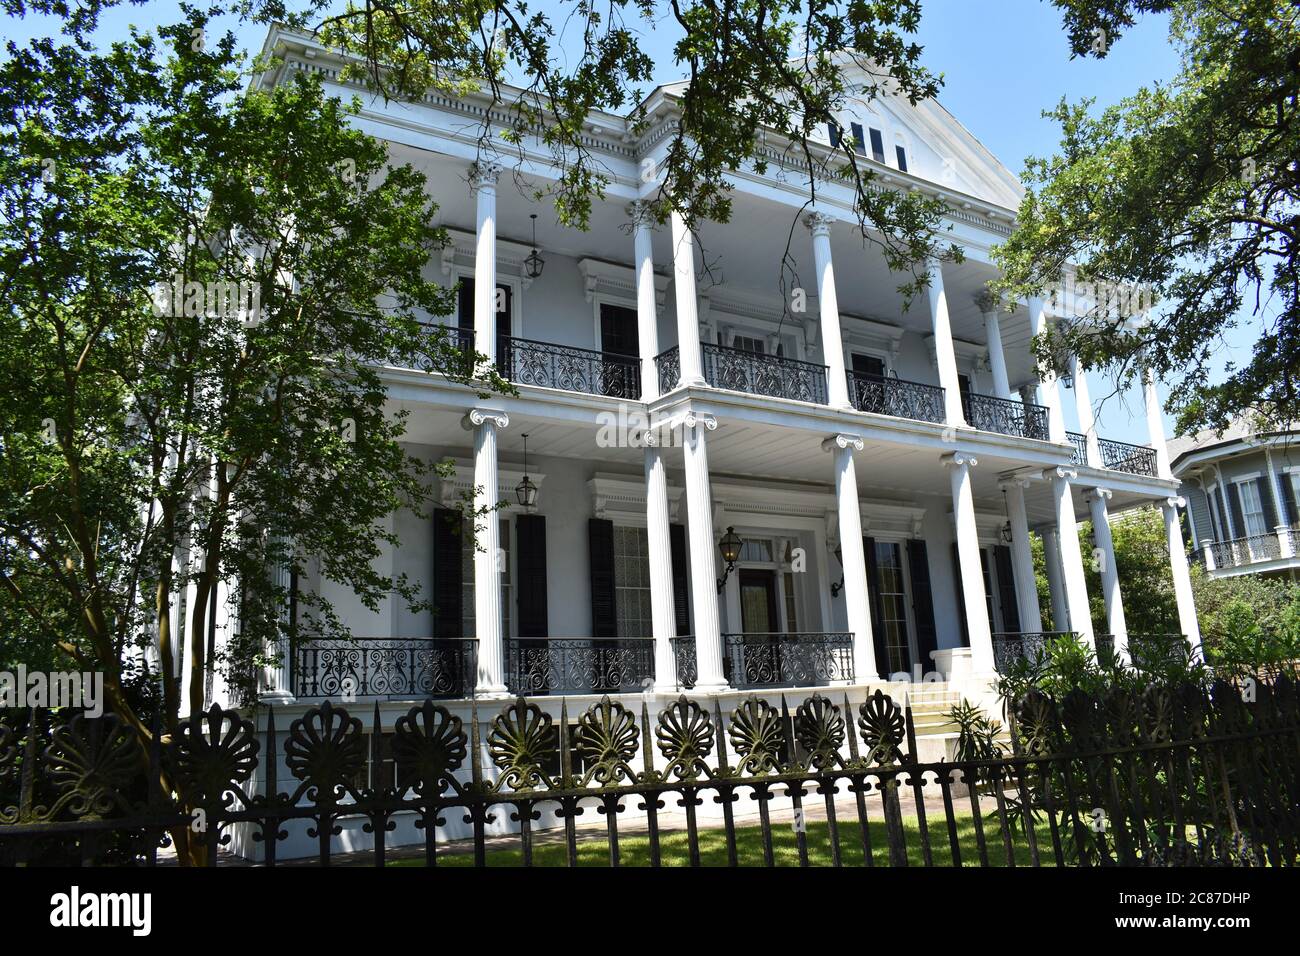 The Buckner Mansion in the Garden District of New Orleans.  The mansion was featured in American Horror Story Coven. White mansion with ironwork fence. Stock Photo